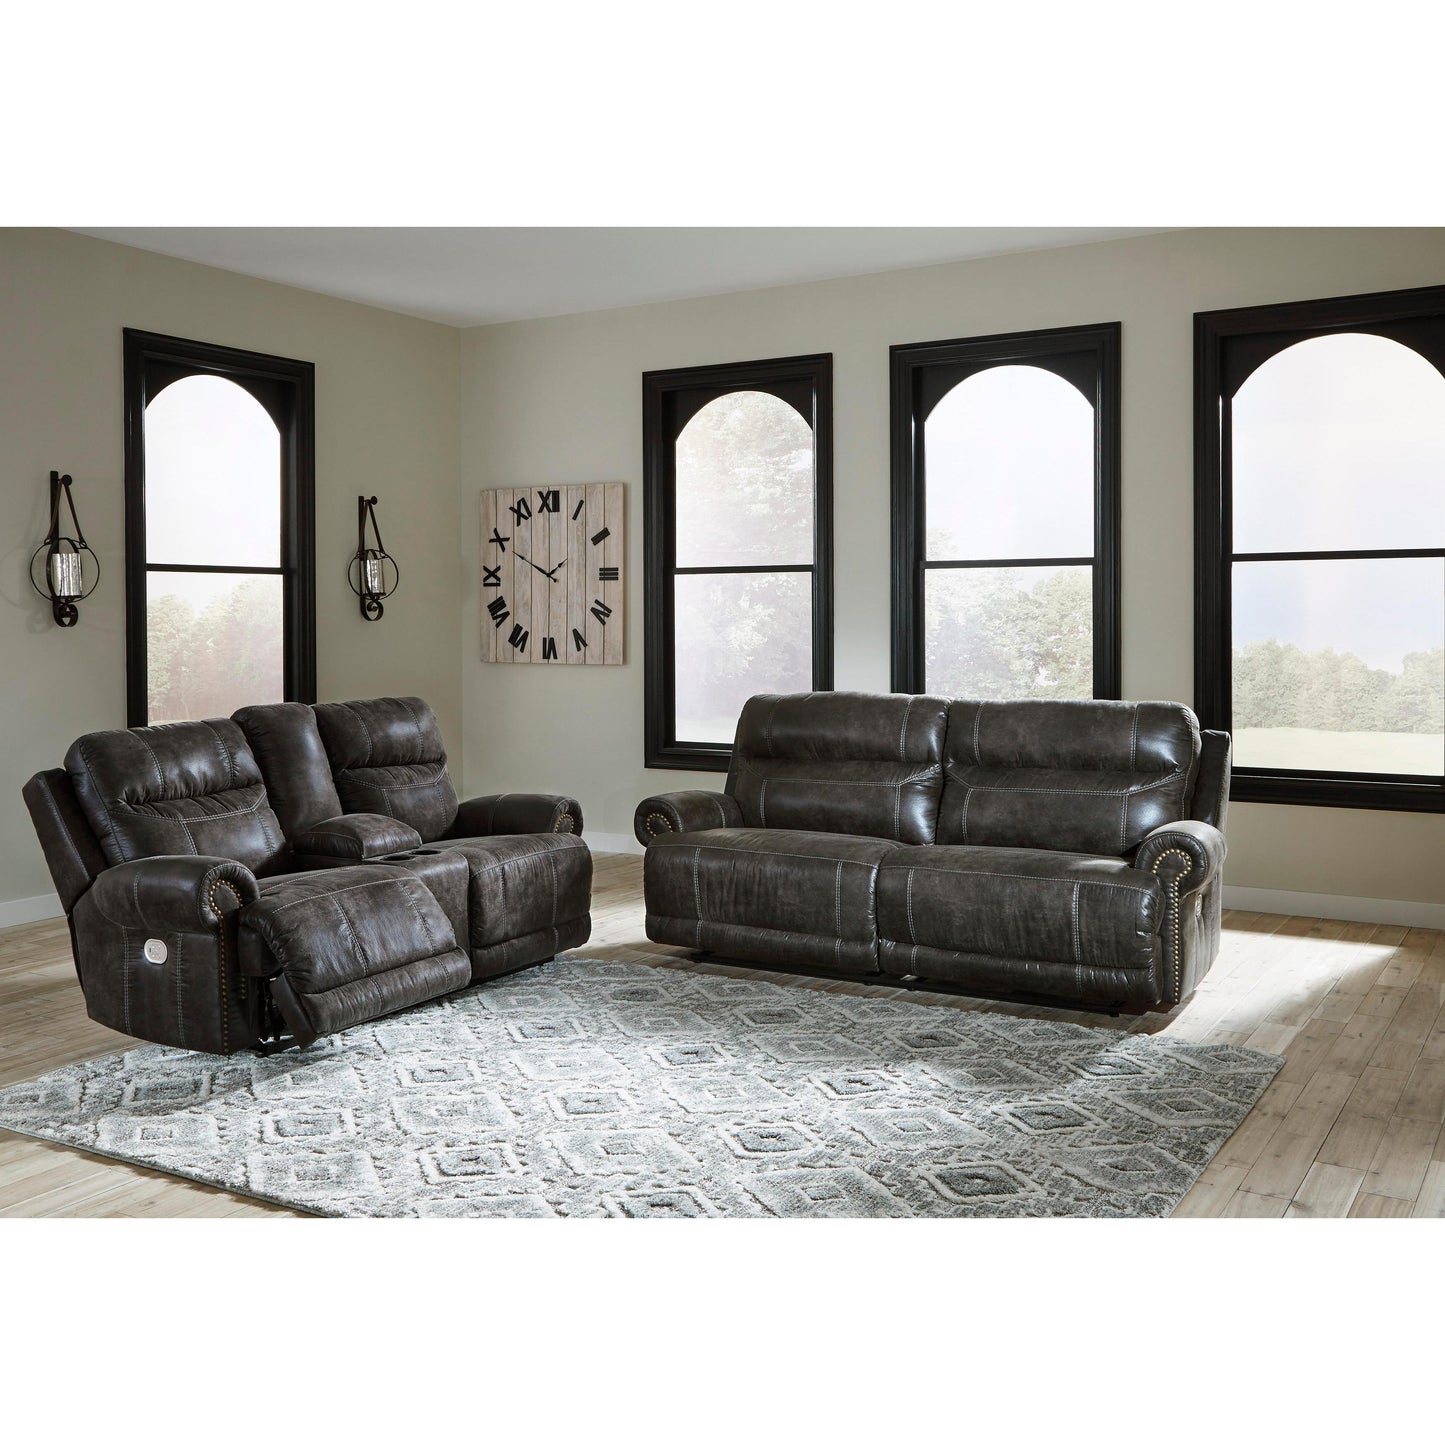 Signature Design by Ashley Grearview 65005U1 2 pc Power Reclining Living Room Set IMAGE 2